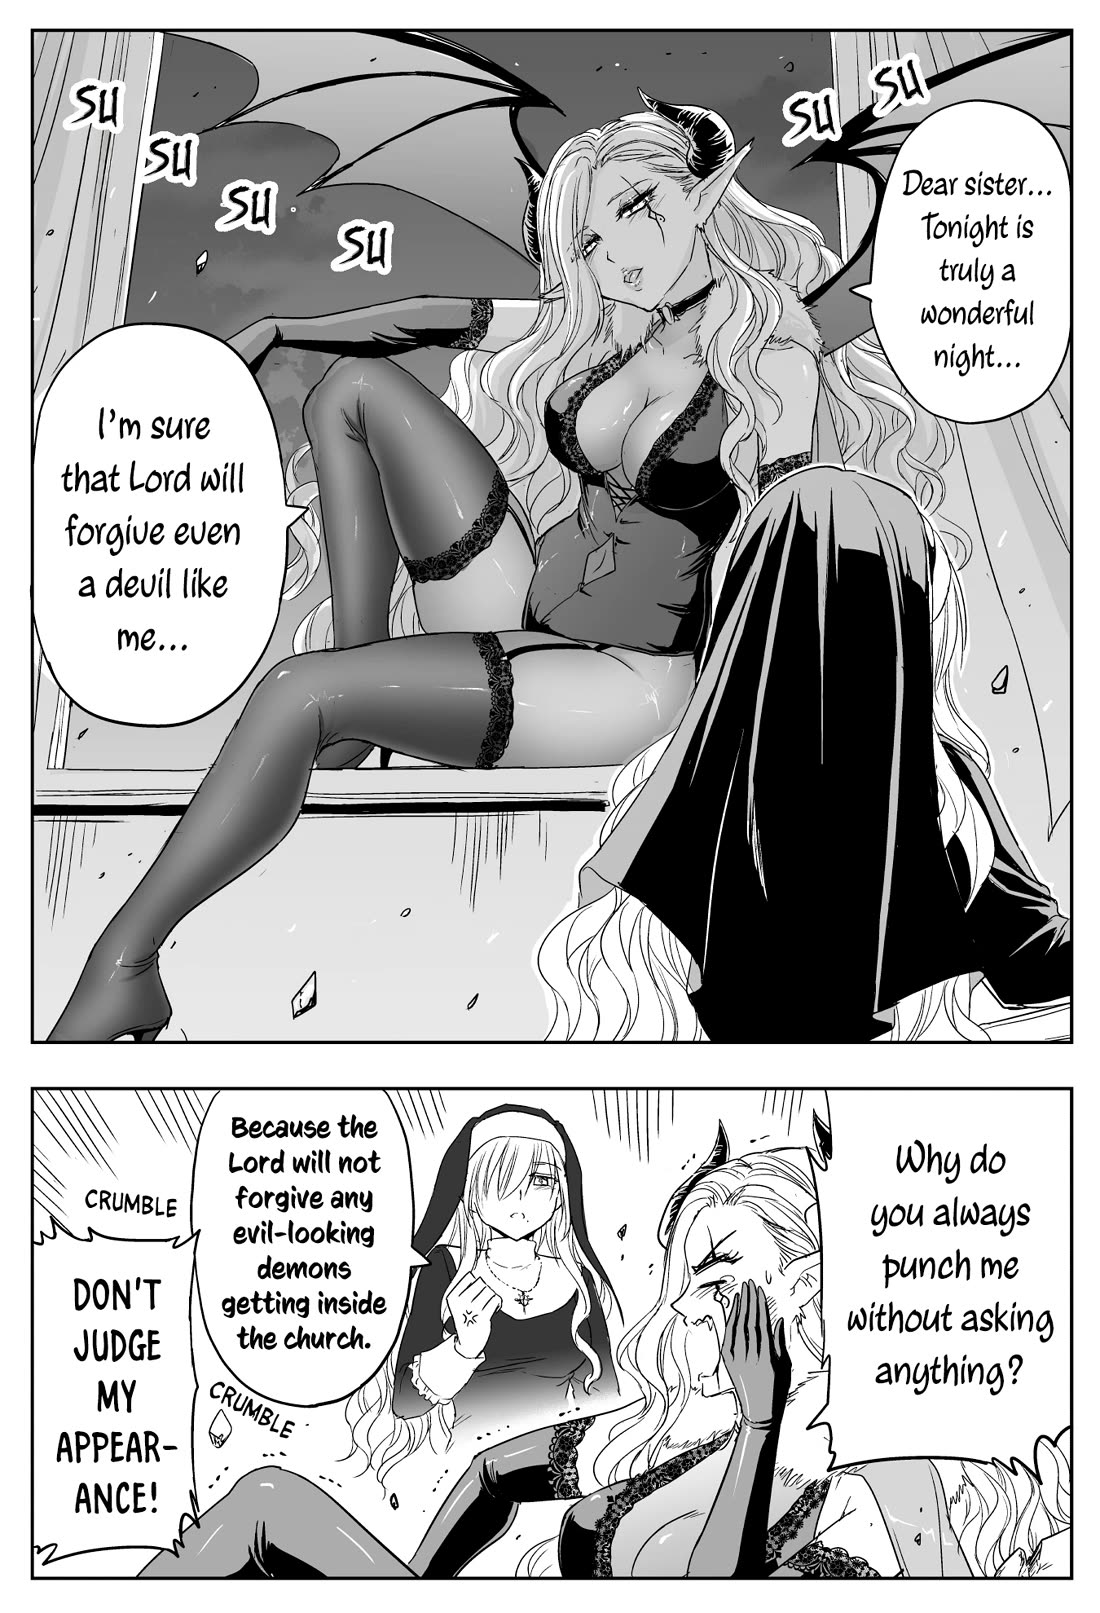 The Sister Of Strength Feats - chapter 32 - #2